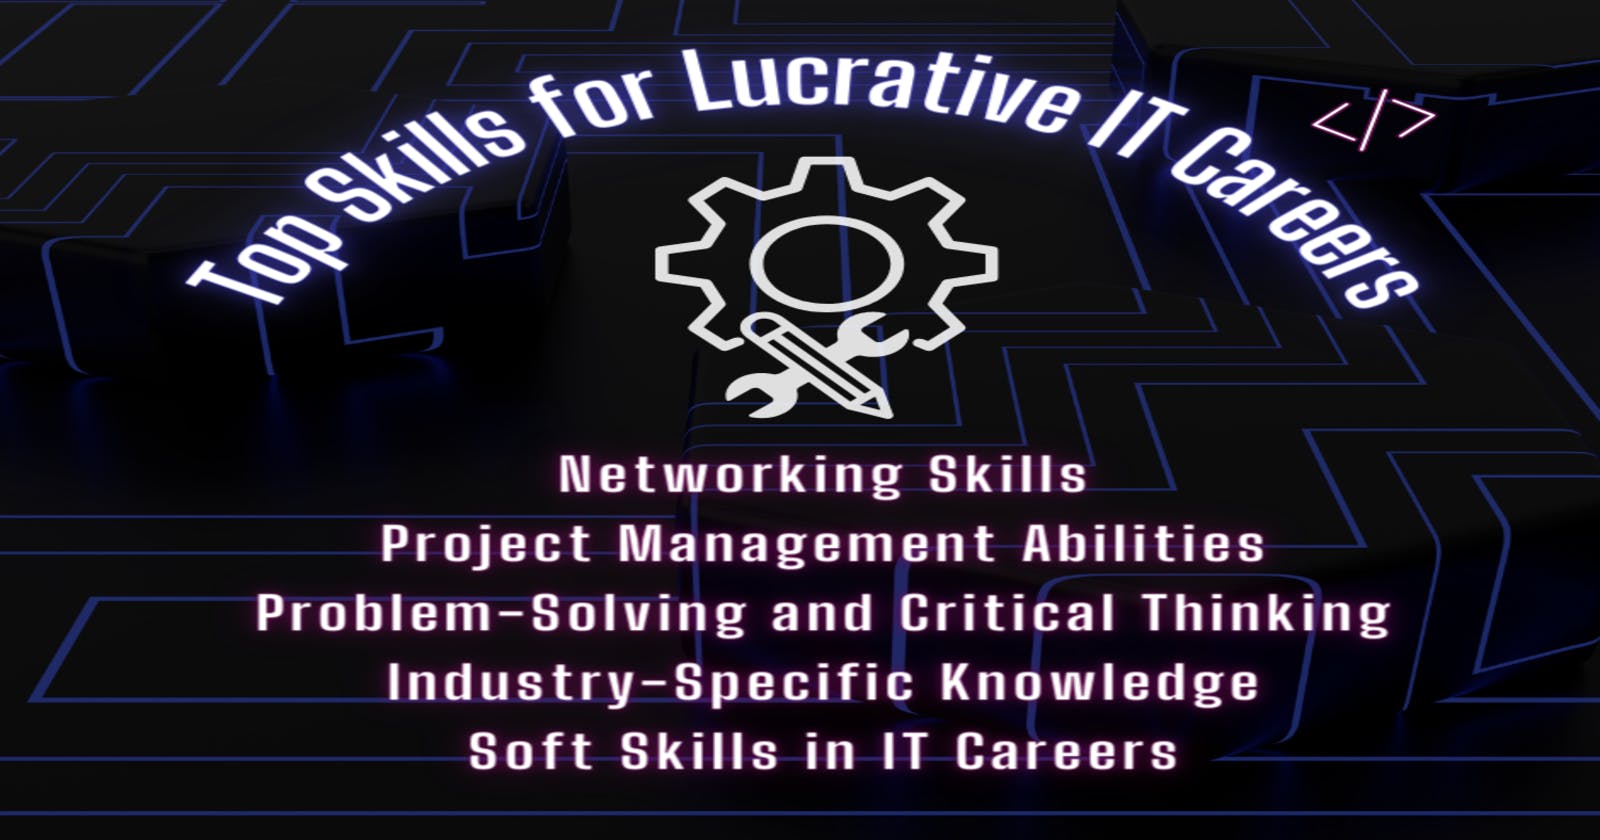 Top Skills for Lucrative IT Careers